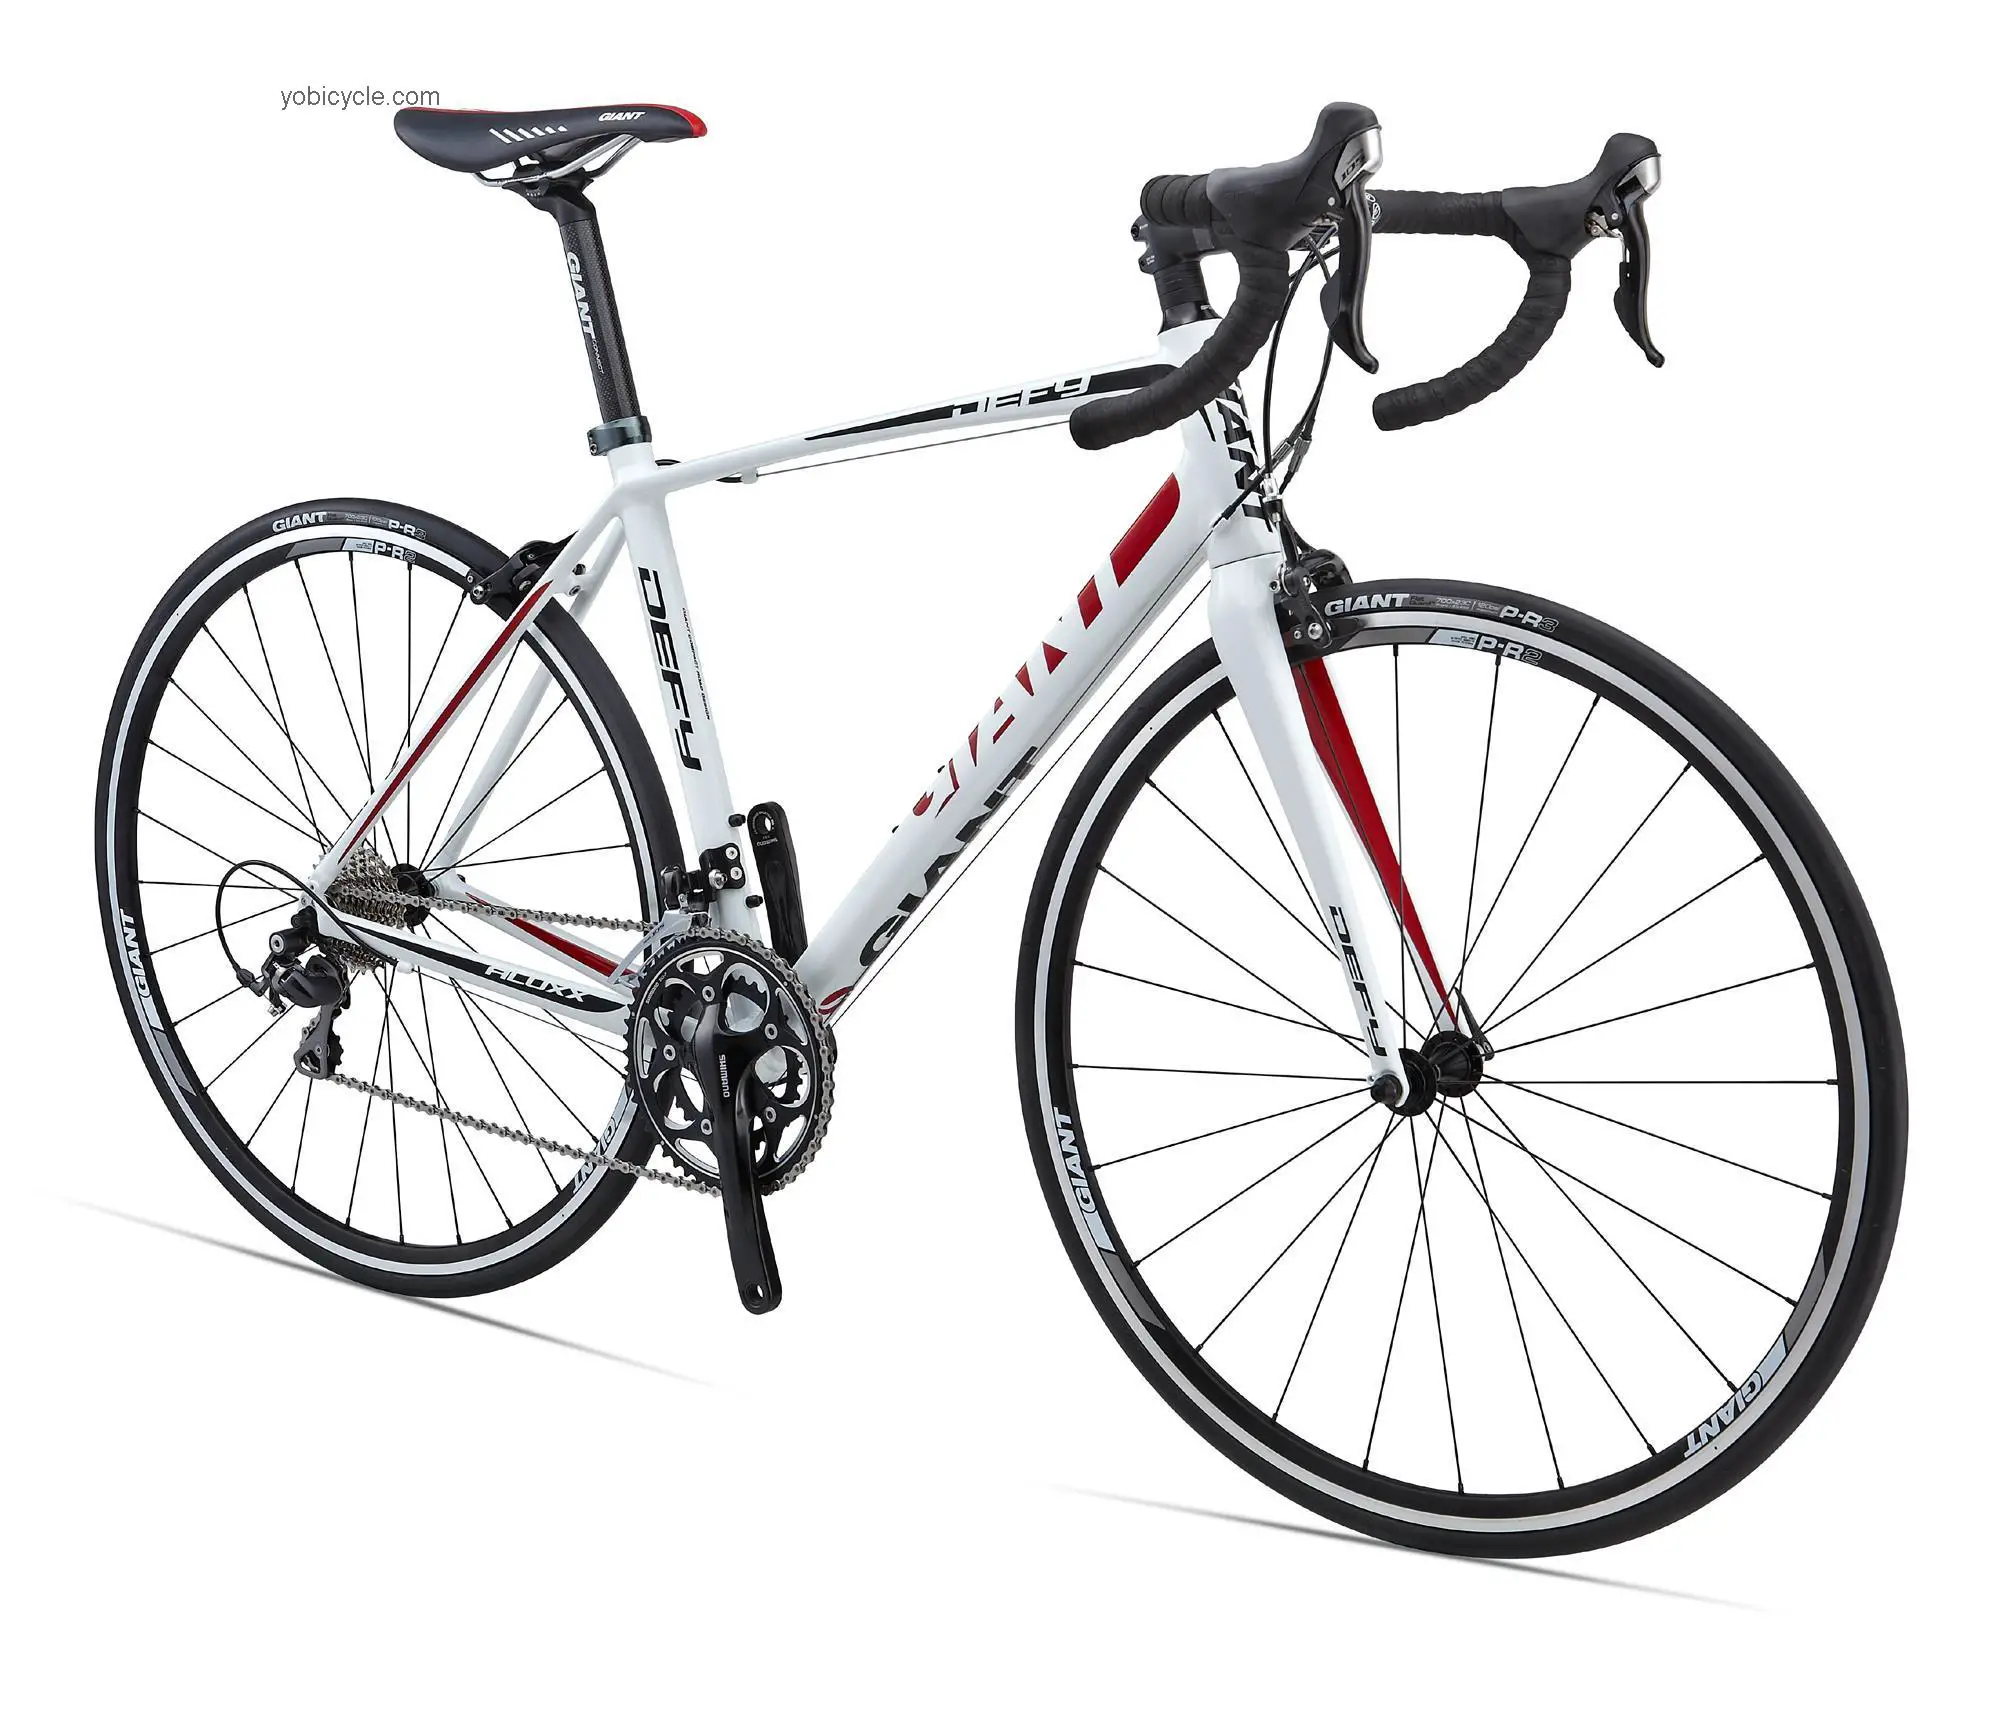 Giant  Defy 1 Technical data and specifications